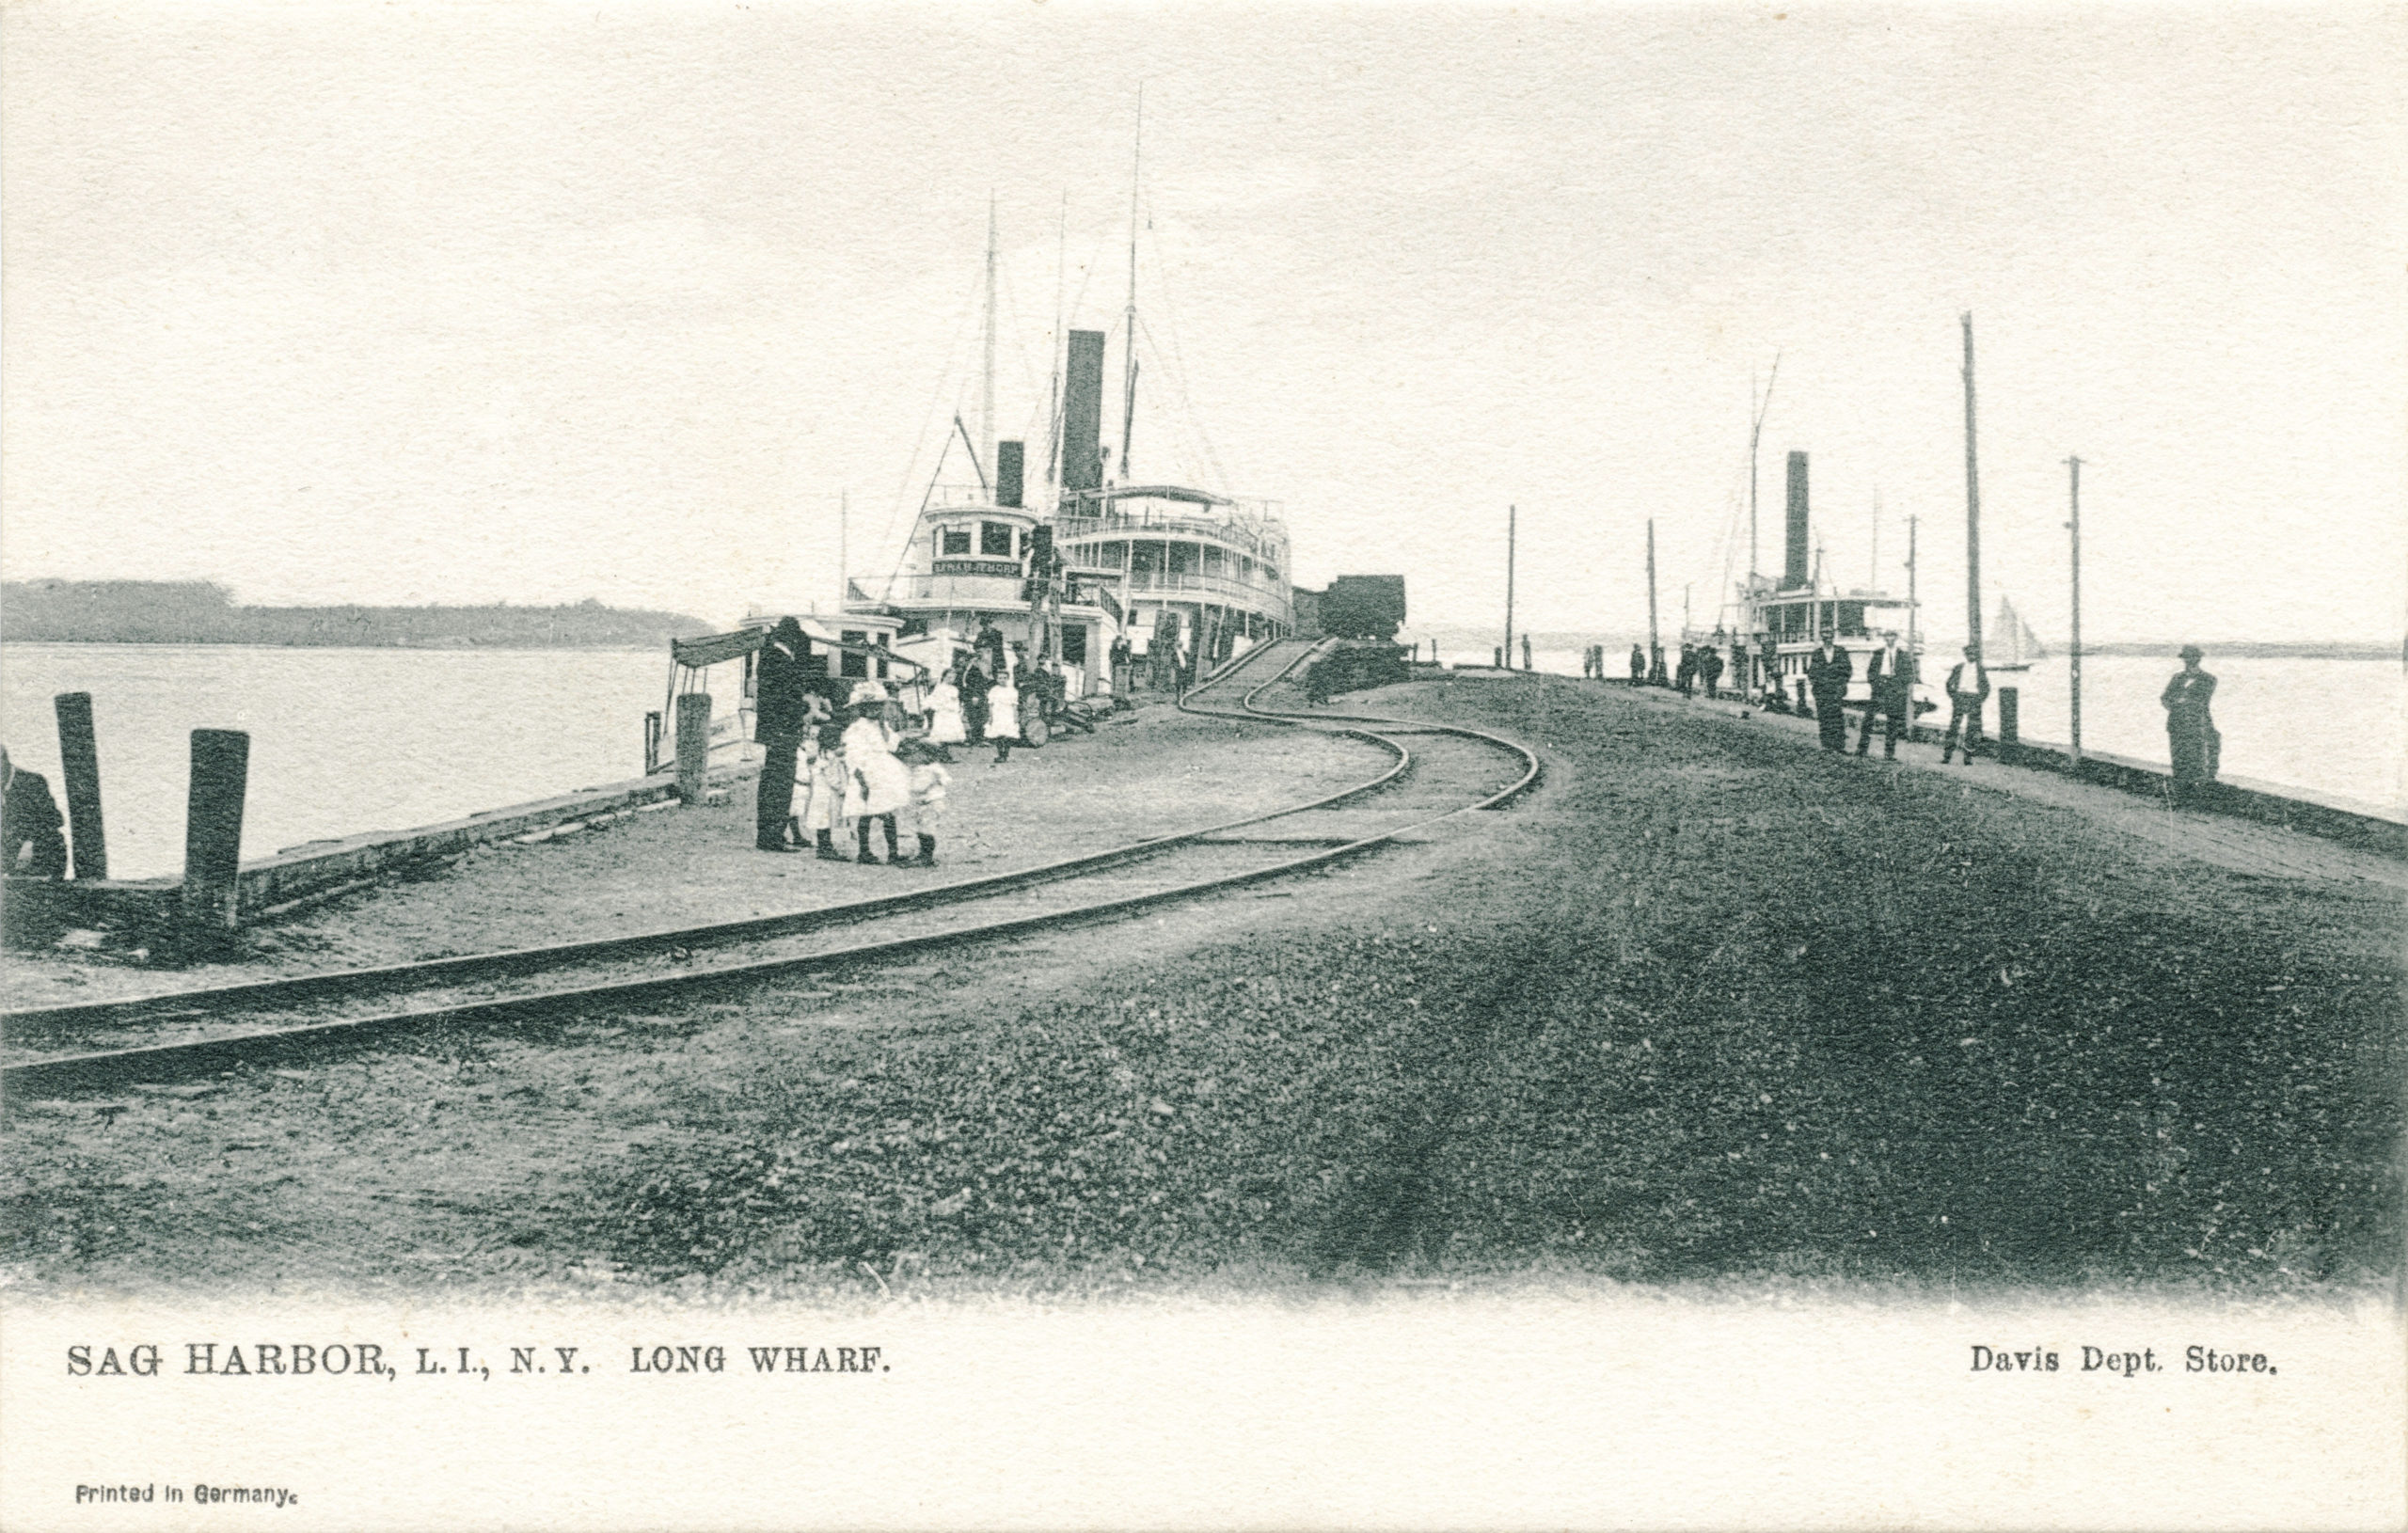 A postcard, circa 1910, shows the railway going onto Long Wharf at just about the same spot where the rail section was found by workers excavating.